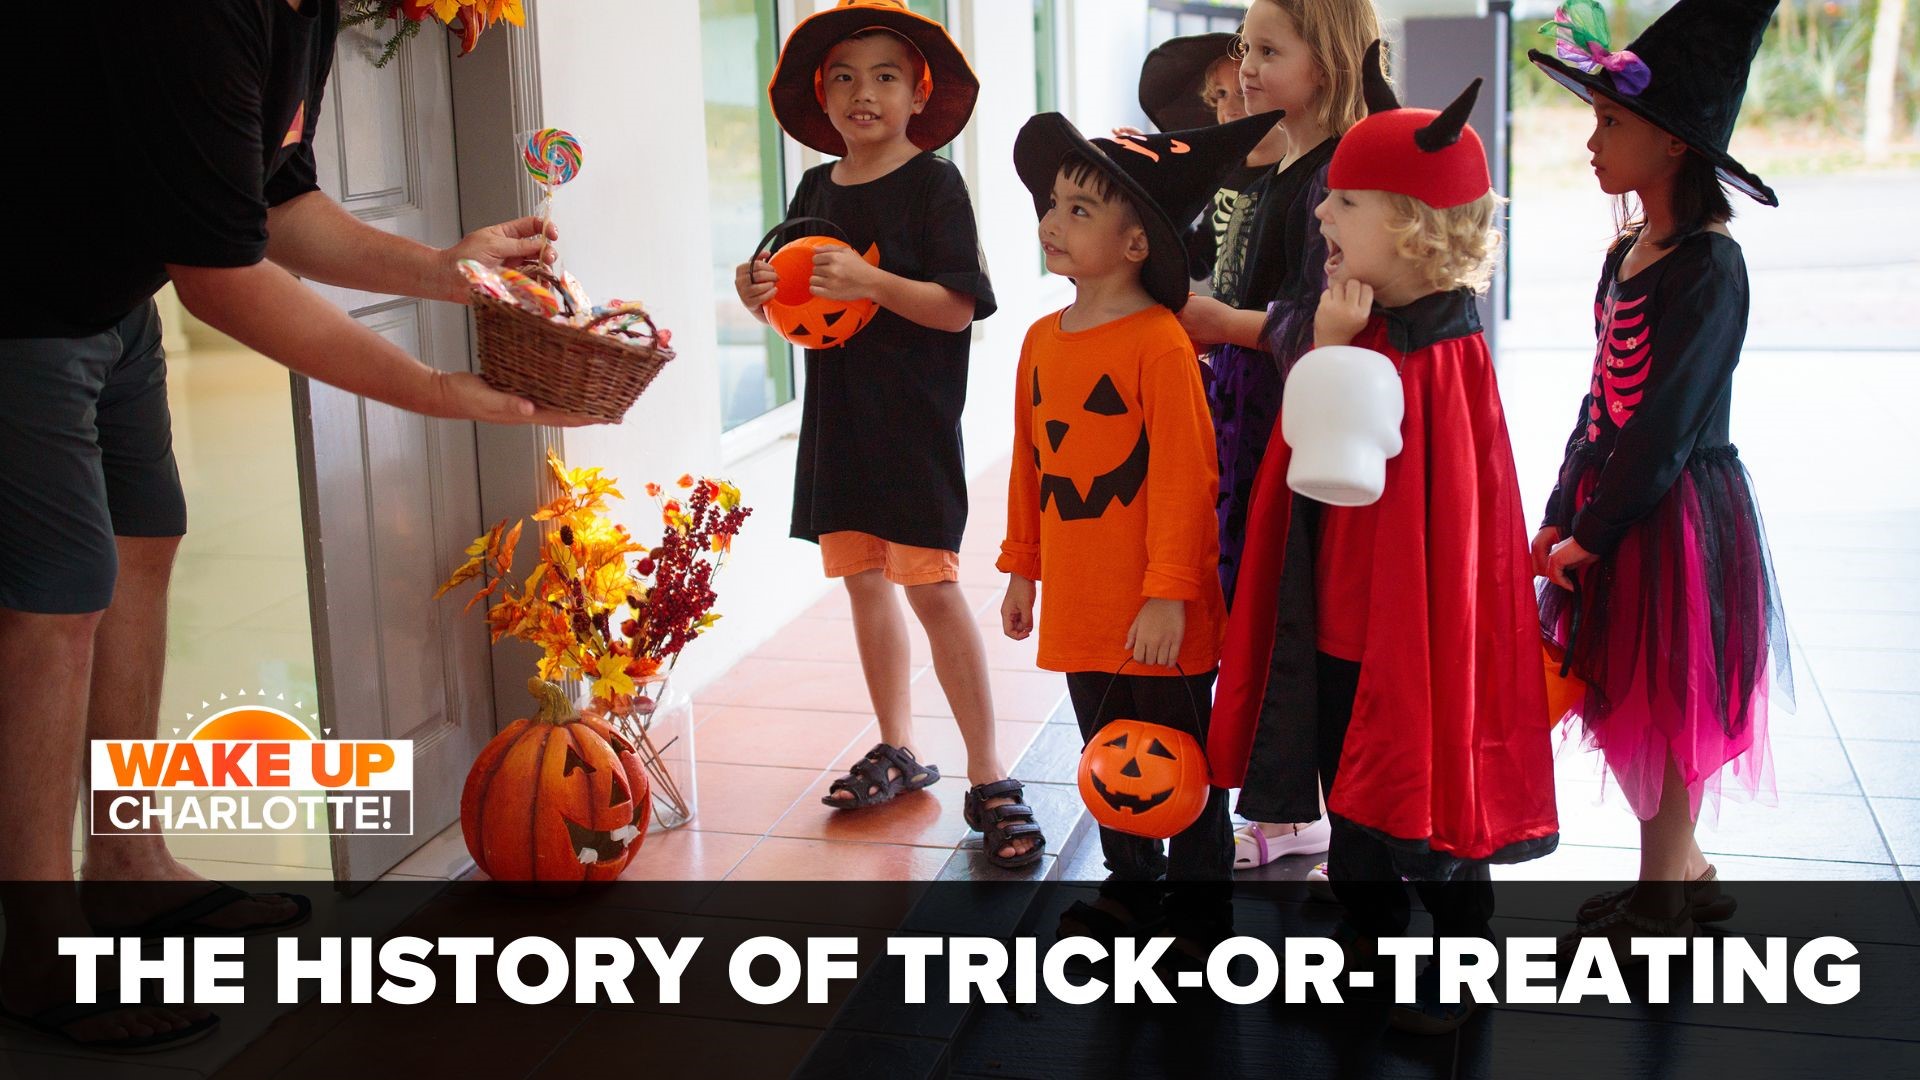 How trickortreating became a beloved Halloween tradition